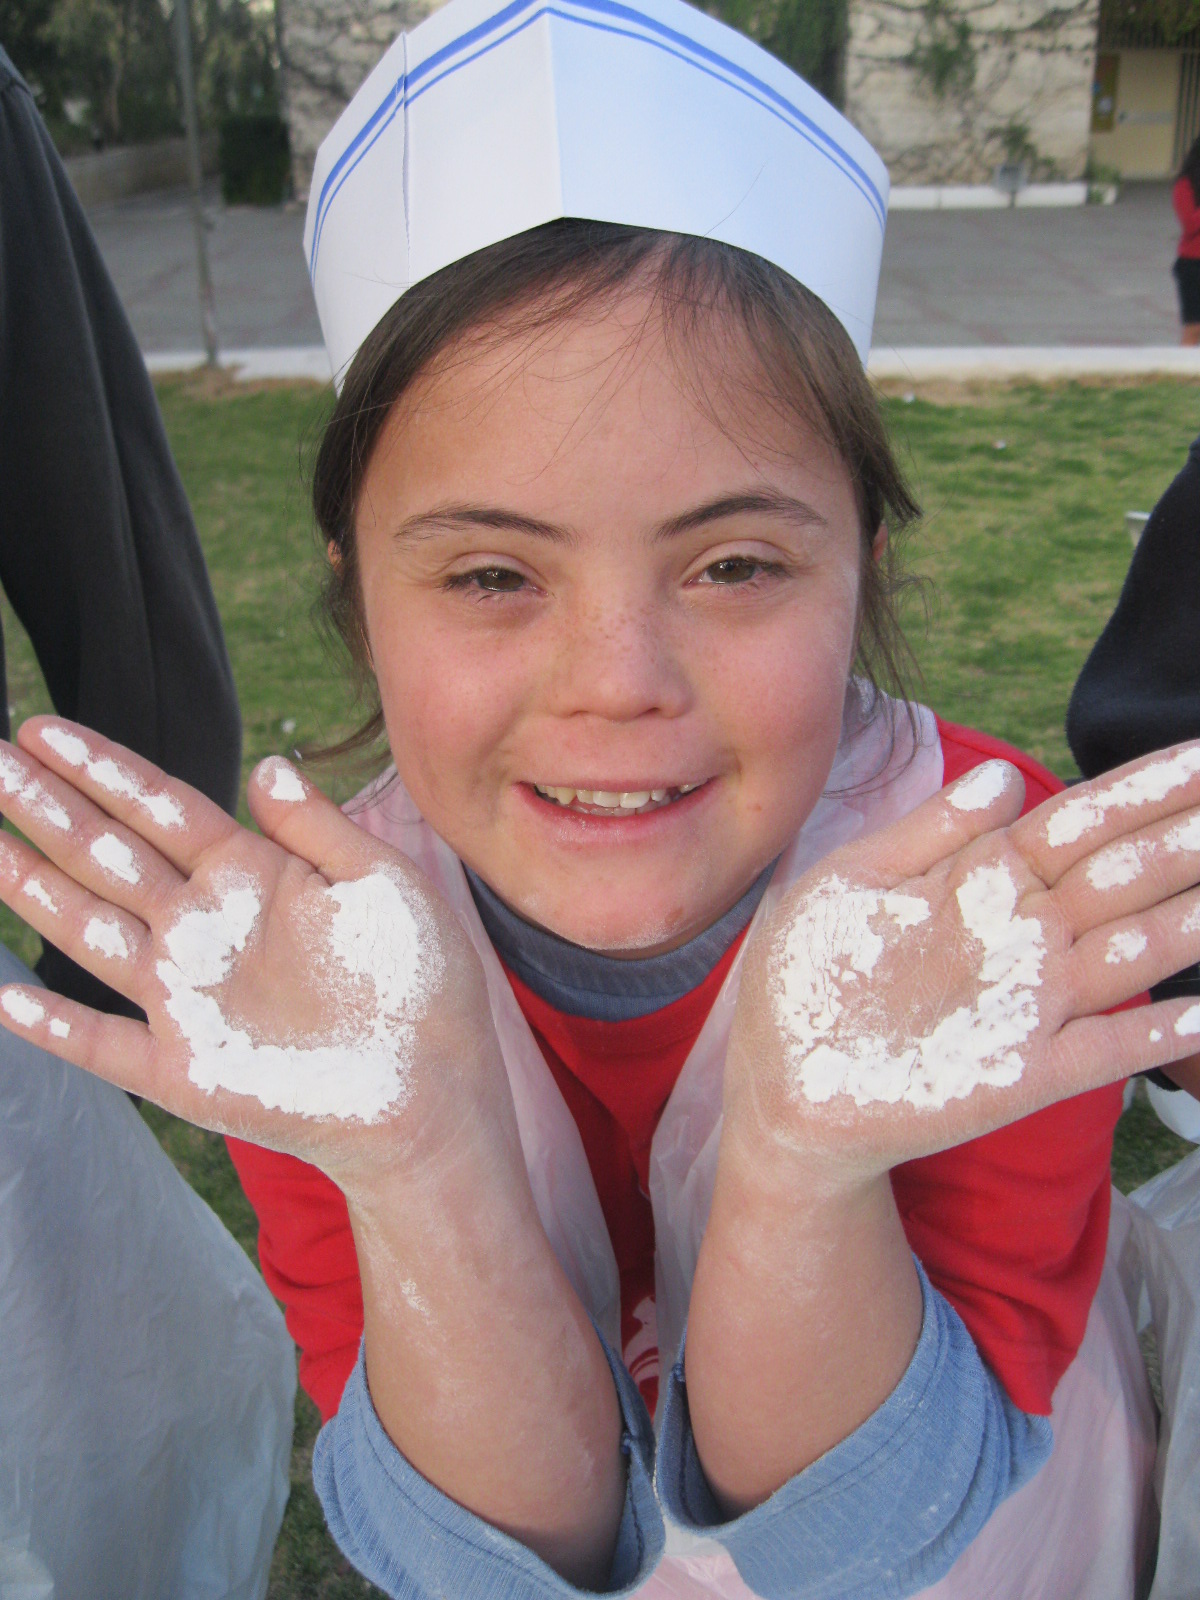 Levav smiling showing that she has paint on her hands